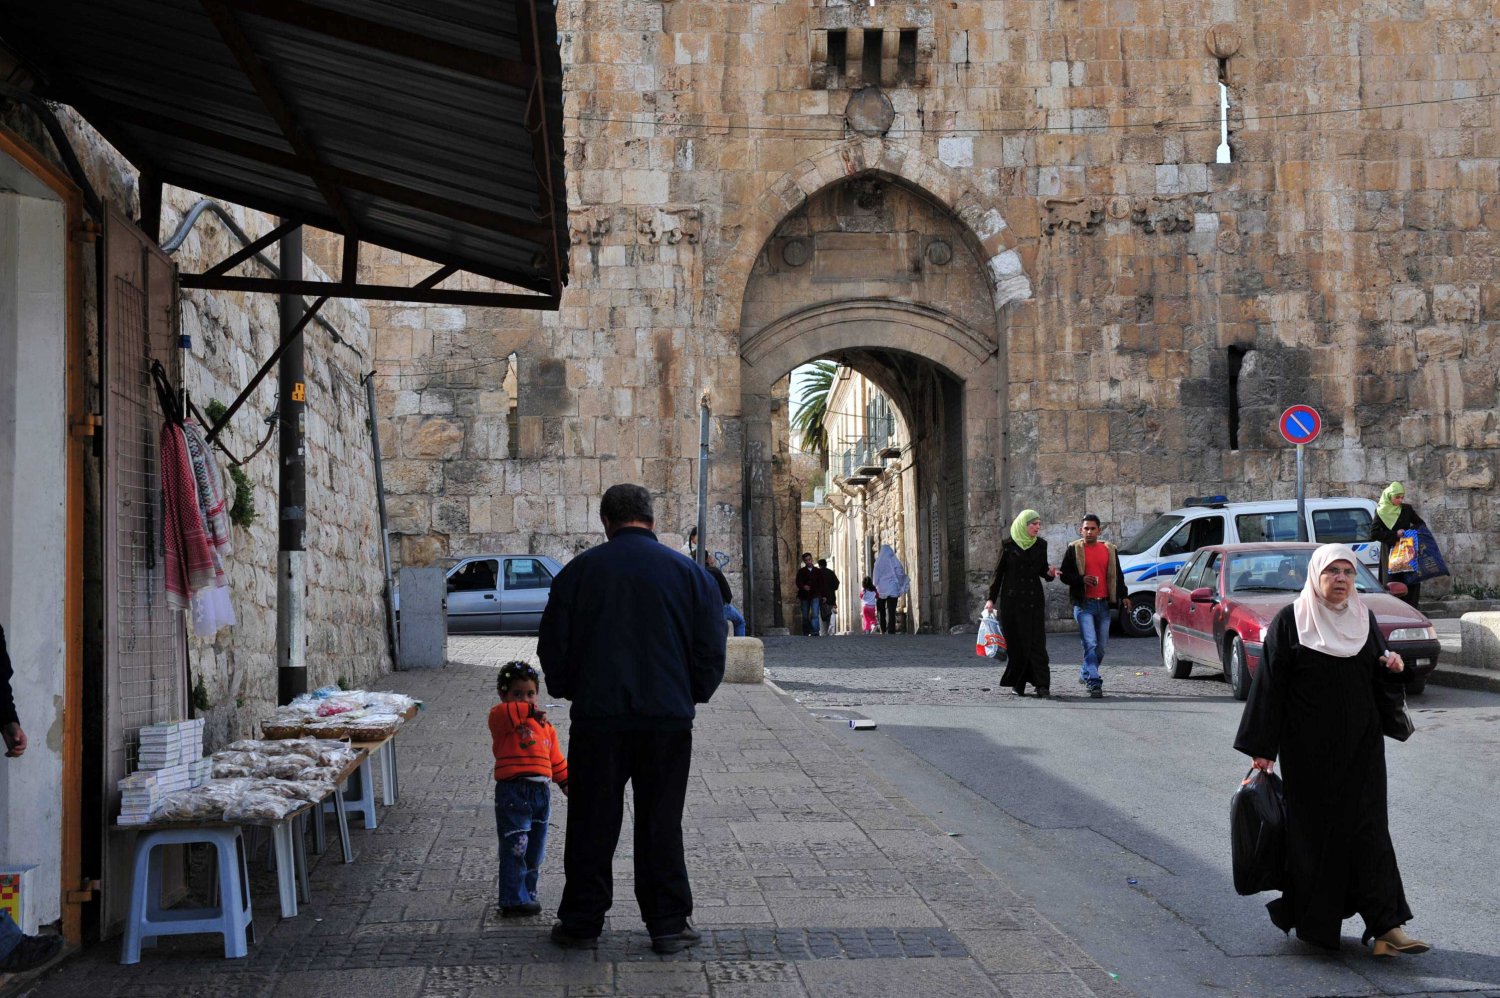 The Lions’ Gate or Bab al-Asbat, one of the gates to Jerusalem's Old City